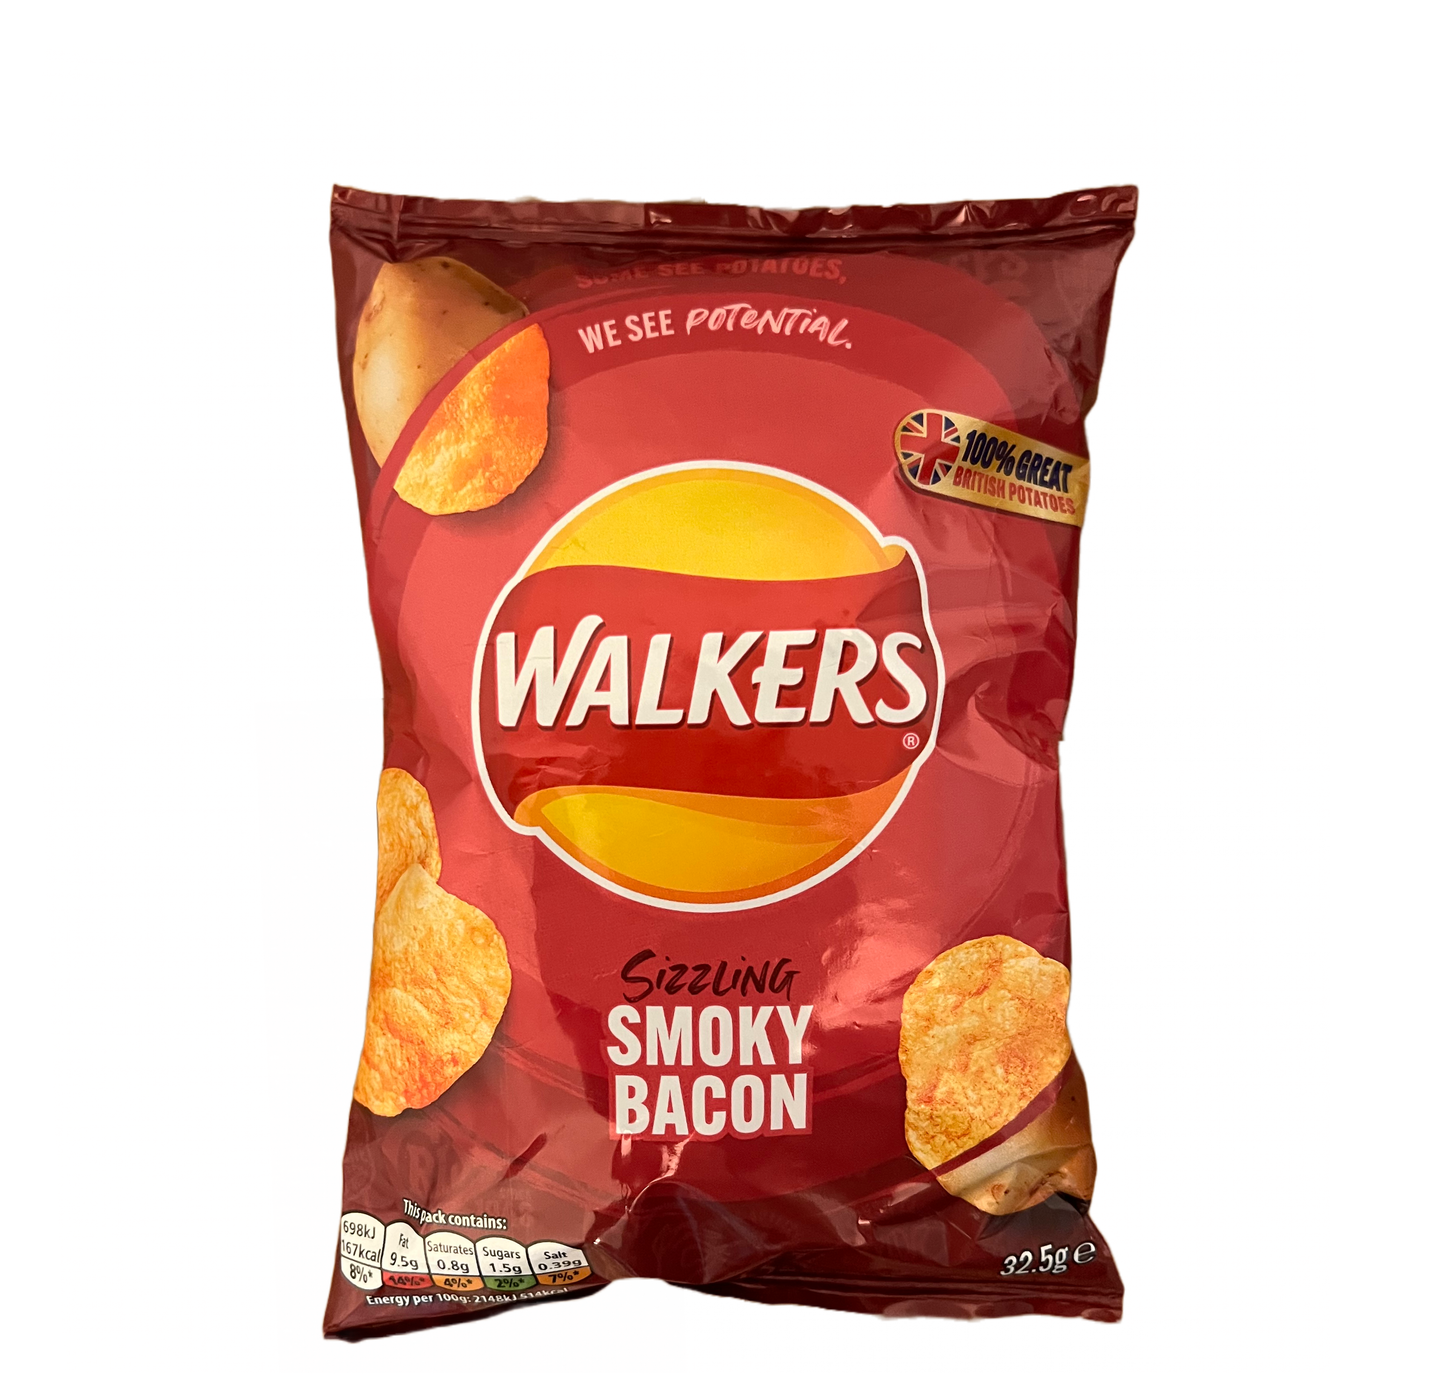 British Walkers Sizzling Smoky Bacon Flavor 32.5g